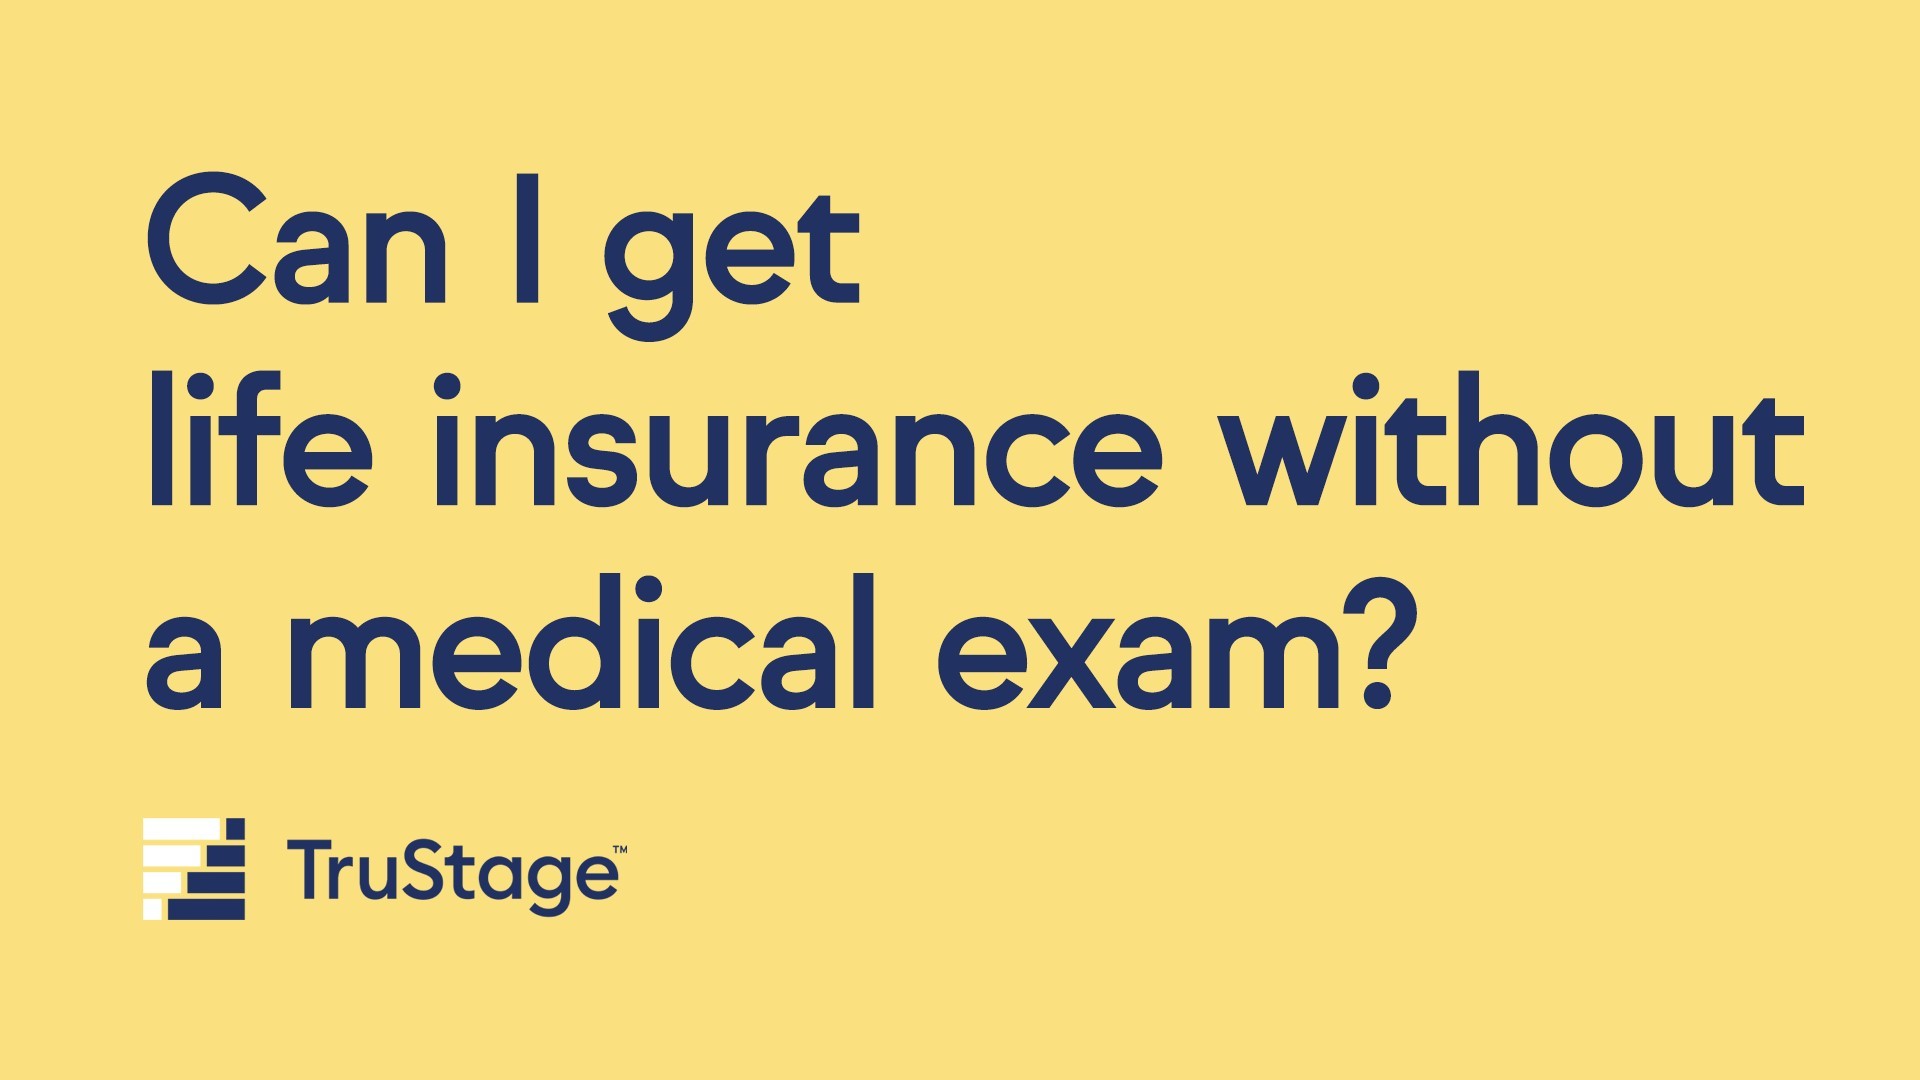 Can I get life insurance without a medical exam?